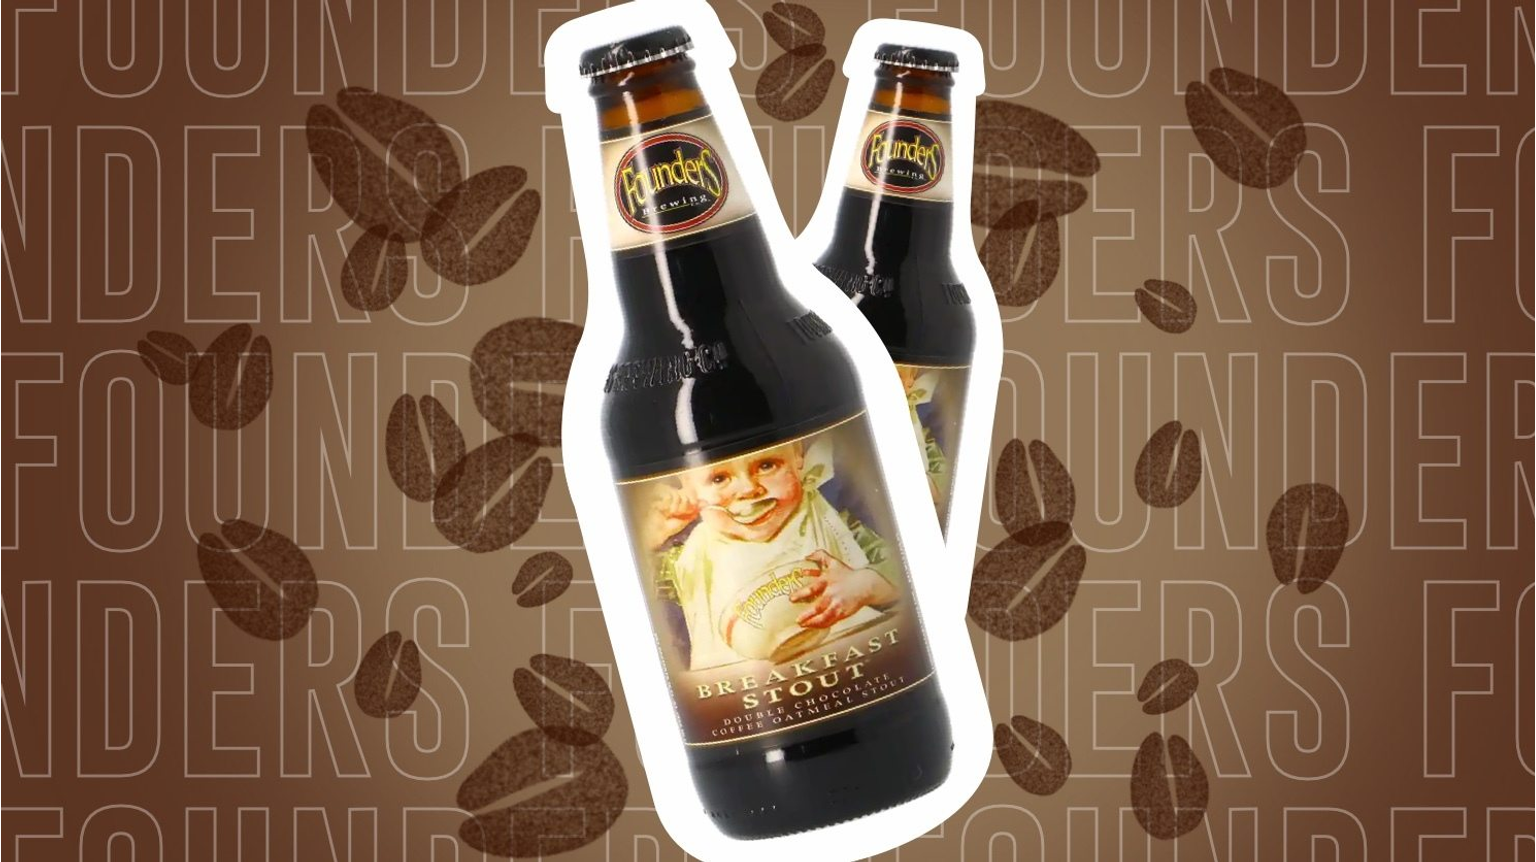 thumbnail for blog article named: Beery Christmas Day 8: Founders Breakfast Stout